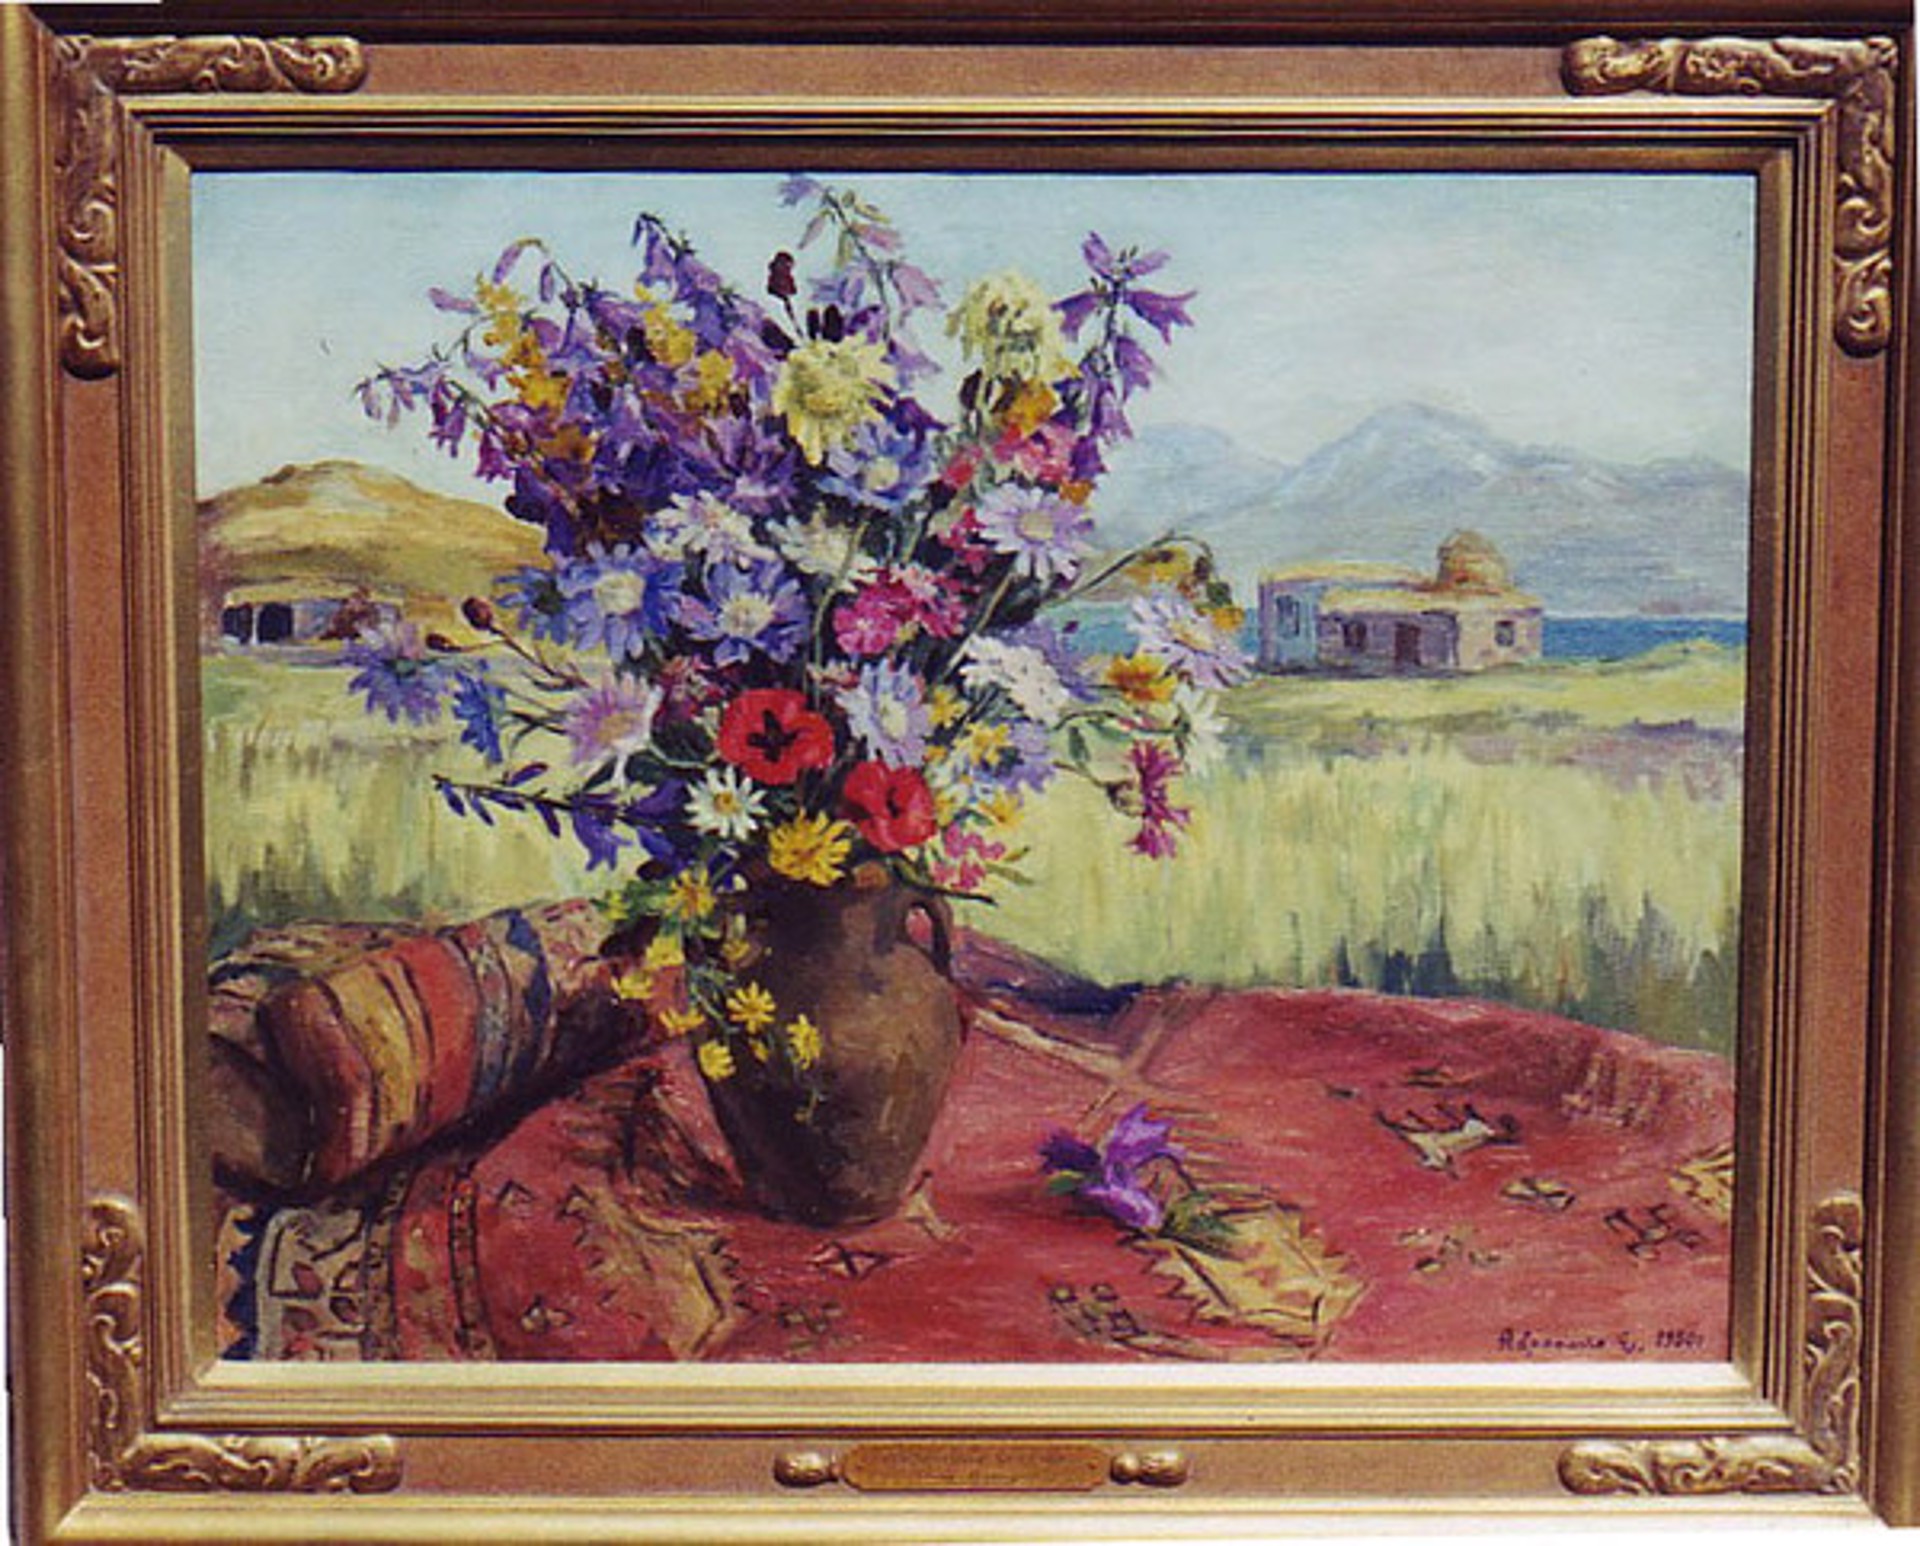 Vase of Flowers on a Carpet by Elena Abramyan